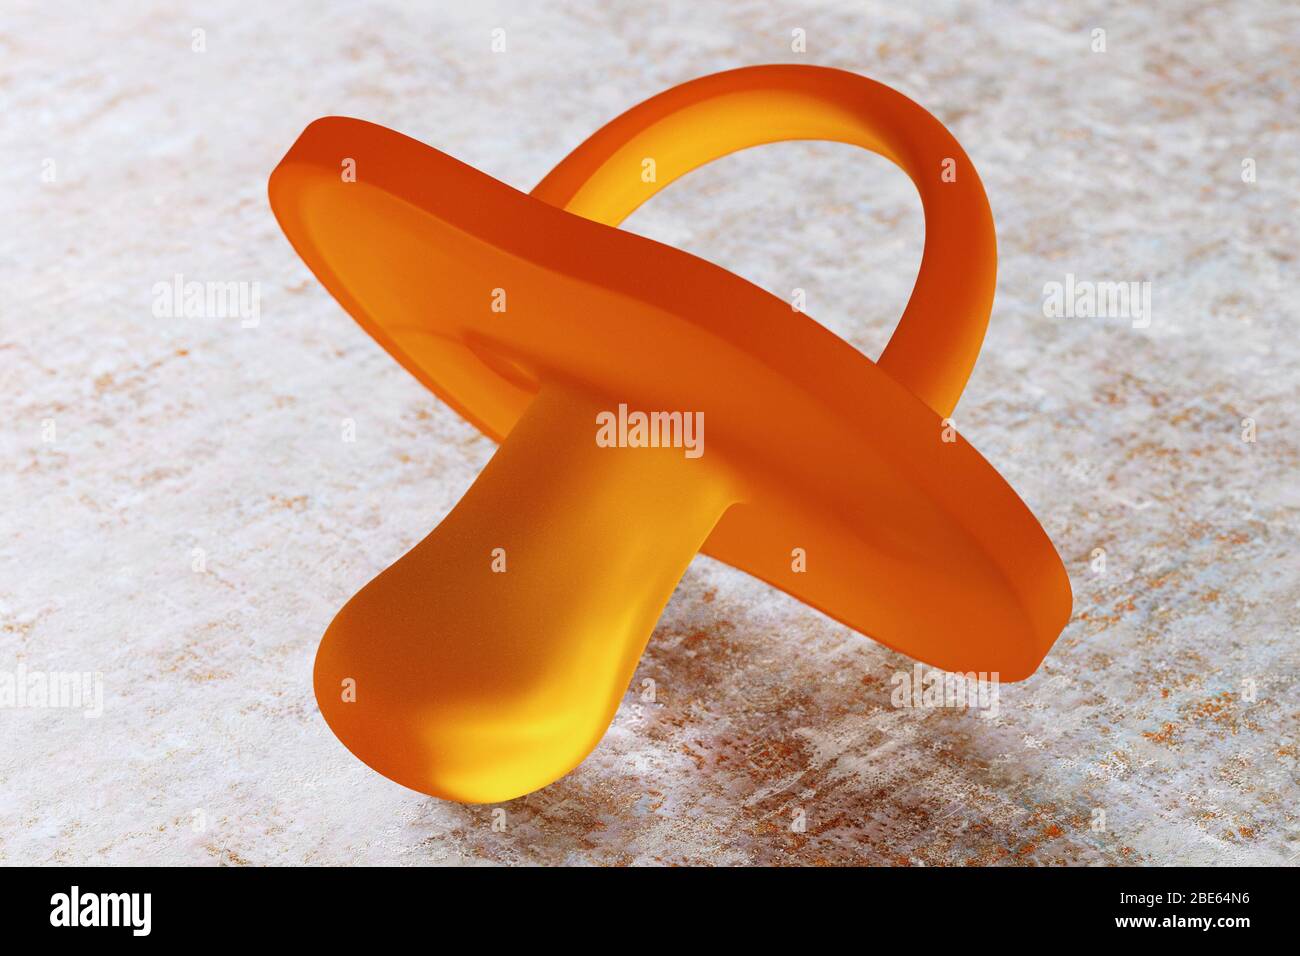 Close-up of natural rubber pacifier on rusty metal surface. Photorealistic 3D illustration. Stock Photo